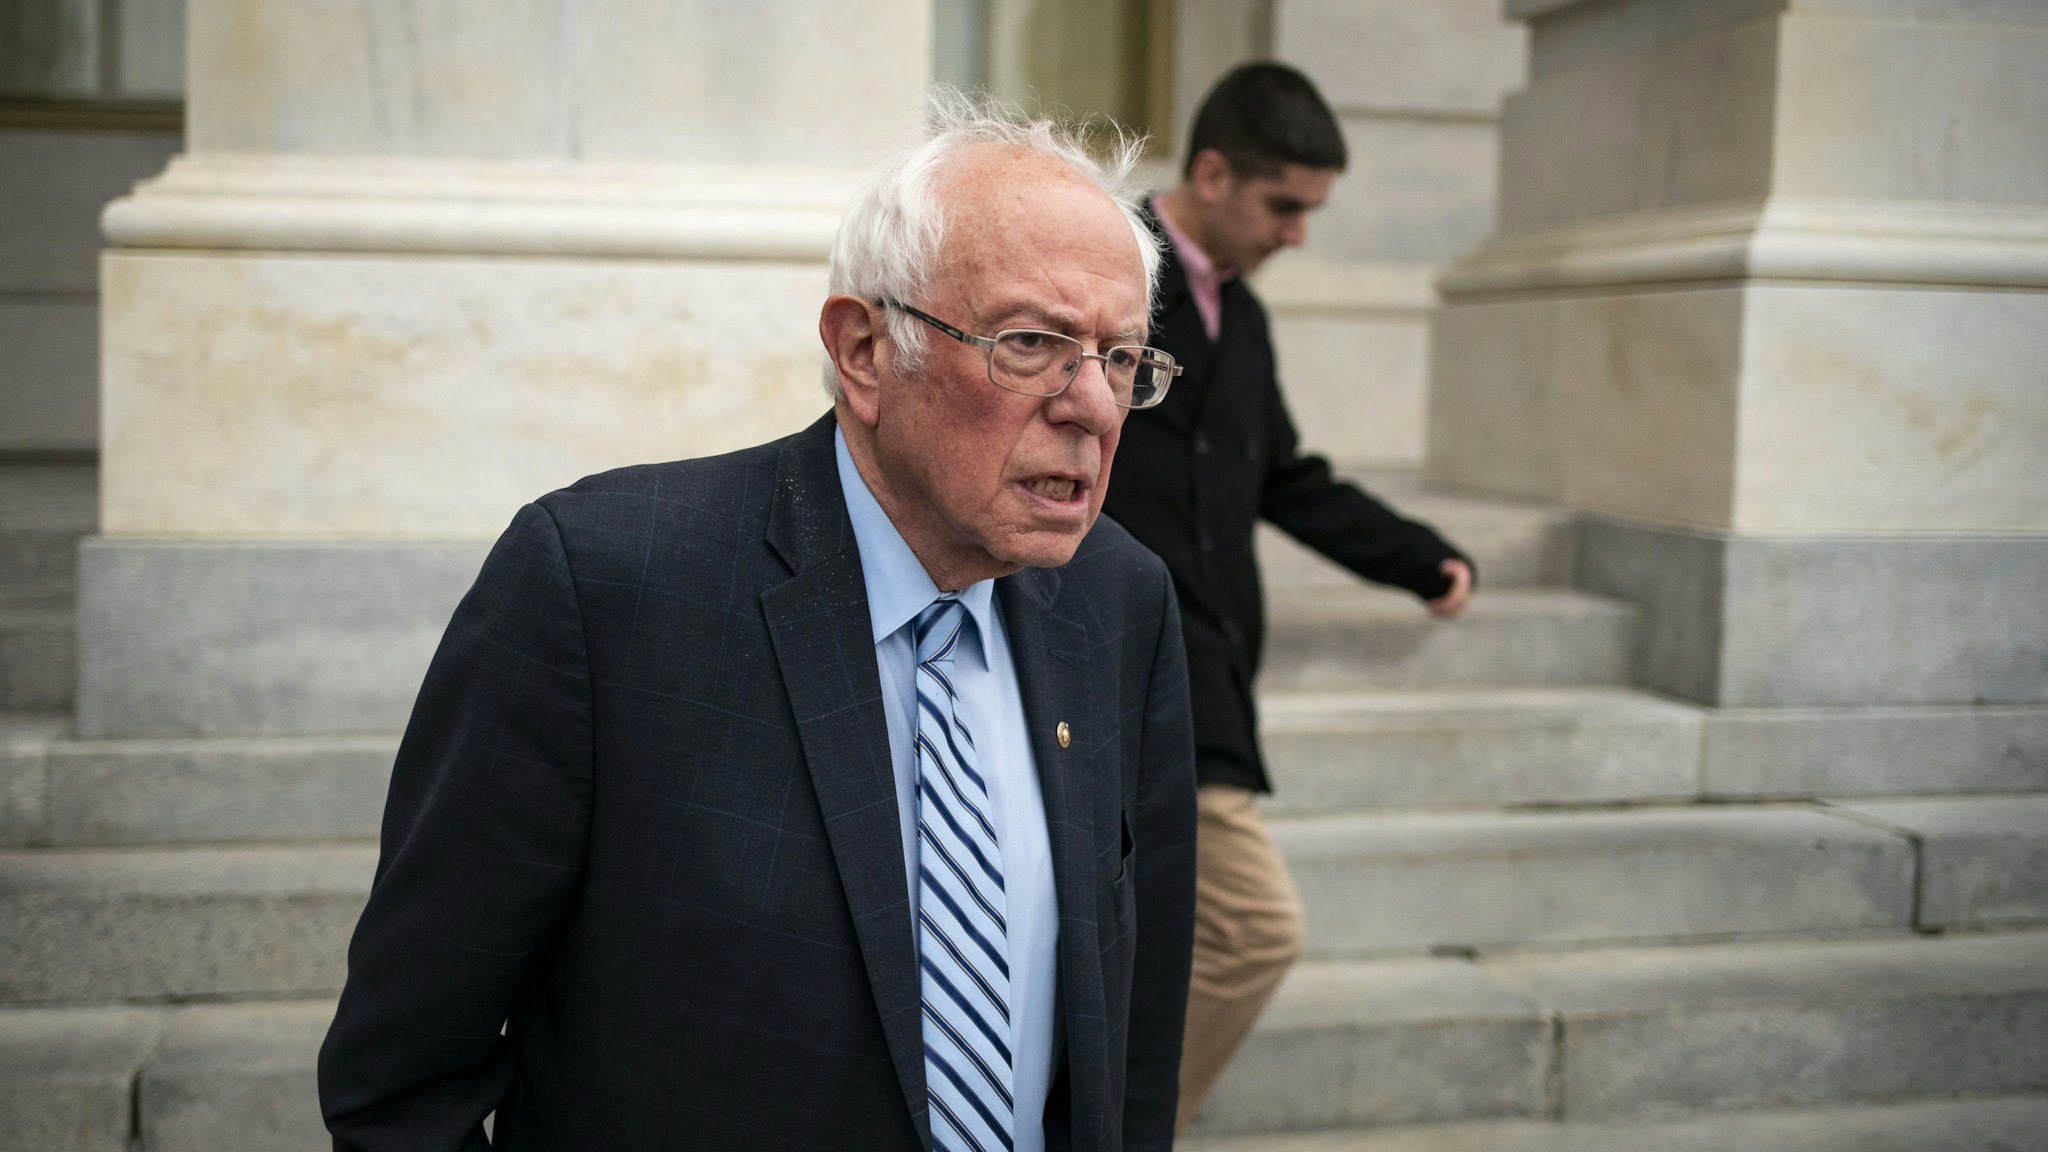 Senator Bernie Sanders, an Independent from Vermont and 2020 presidential candidate, exits the U.S. Capitol after a vote in Washington, D.C., U.S., on Wednesday, March 18, 2020. The Senate cleared the second major bill responding to the coronavirus pandemic, with lawmakers rushing to follow up with an additional economic rescue package that President Donald Trump's administration estimates will cost $1.3 trillion. Photographer: Al Drago/Bloomberg via Getty Images